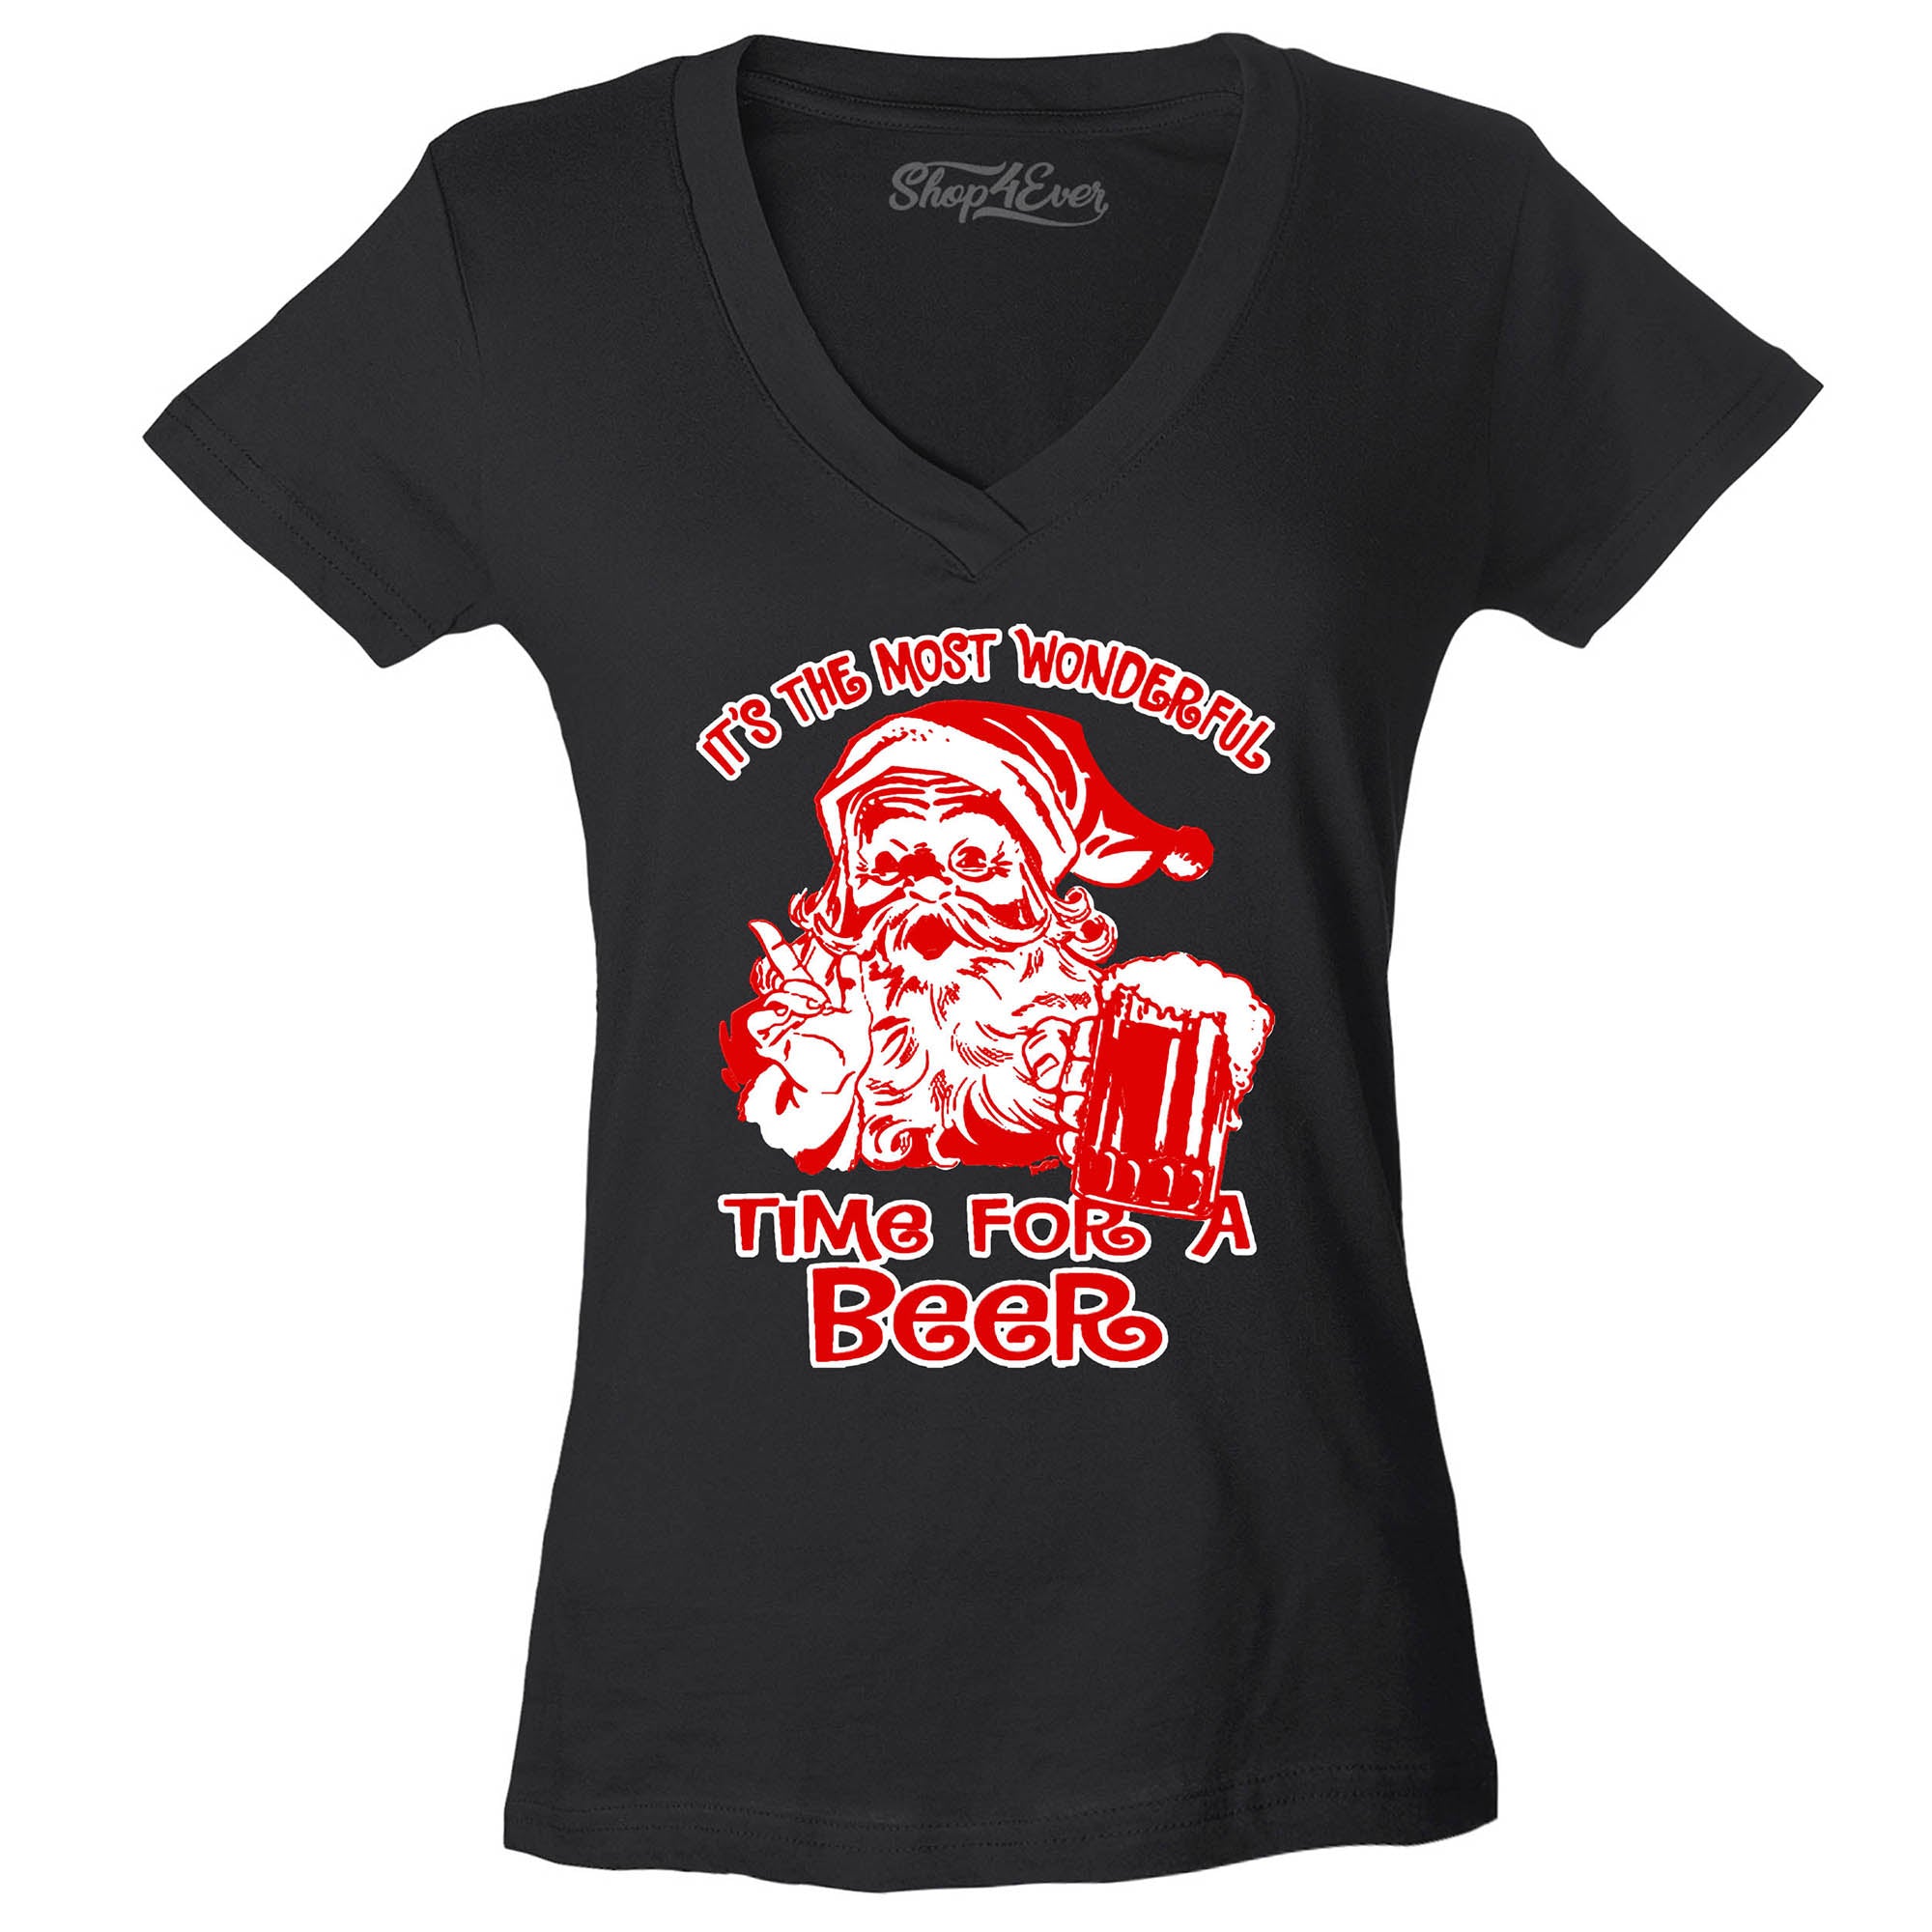 It's The Most Wonderful Time for a Beer Women's V-Neck T-Shirt Slim FIT